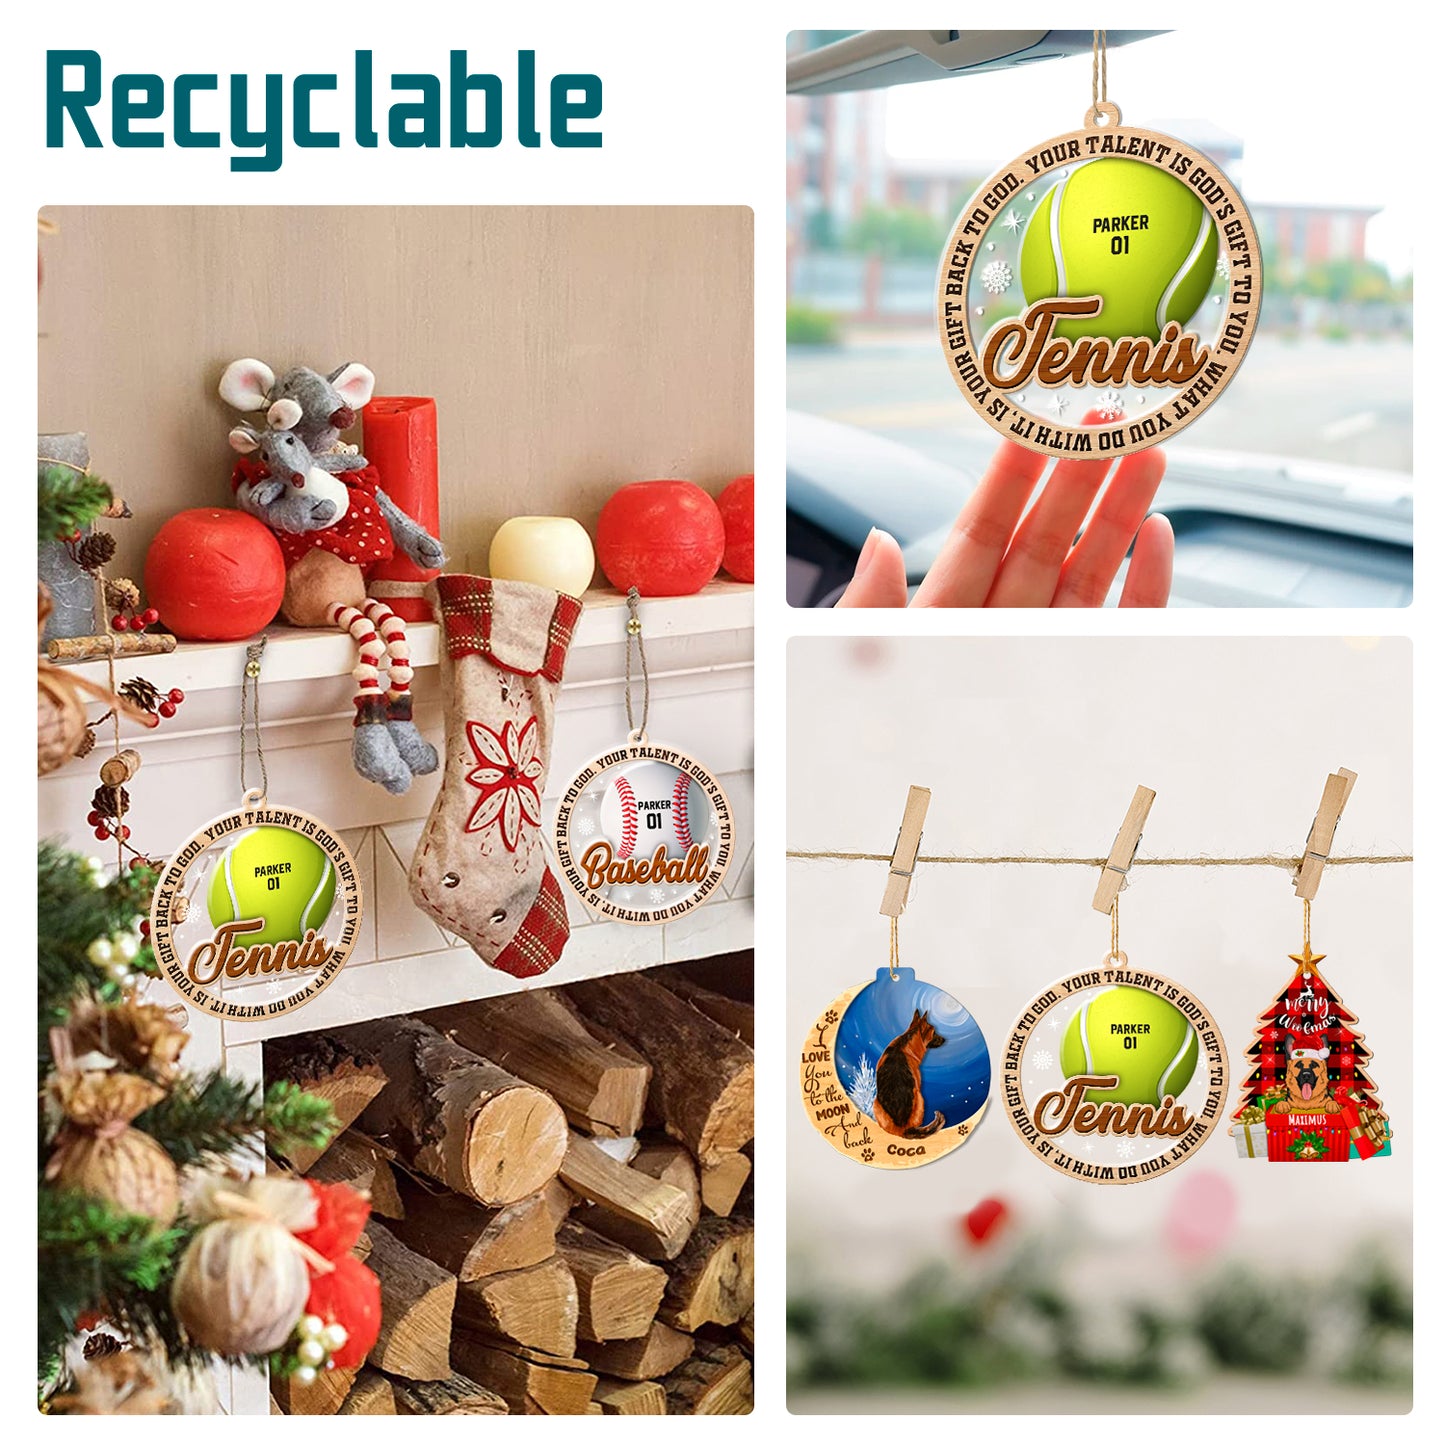 Personalized Tennis 2-Layer Wood & Acrylic Christmas Ornament